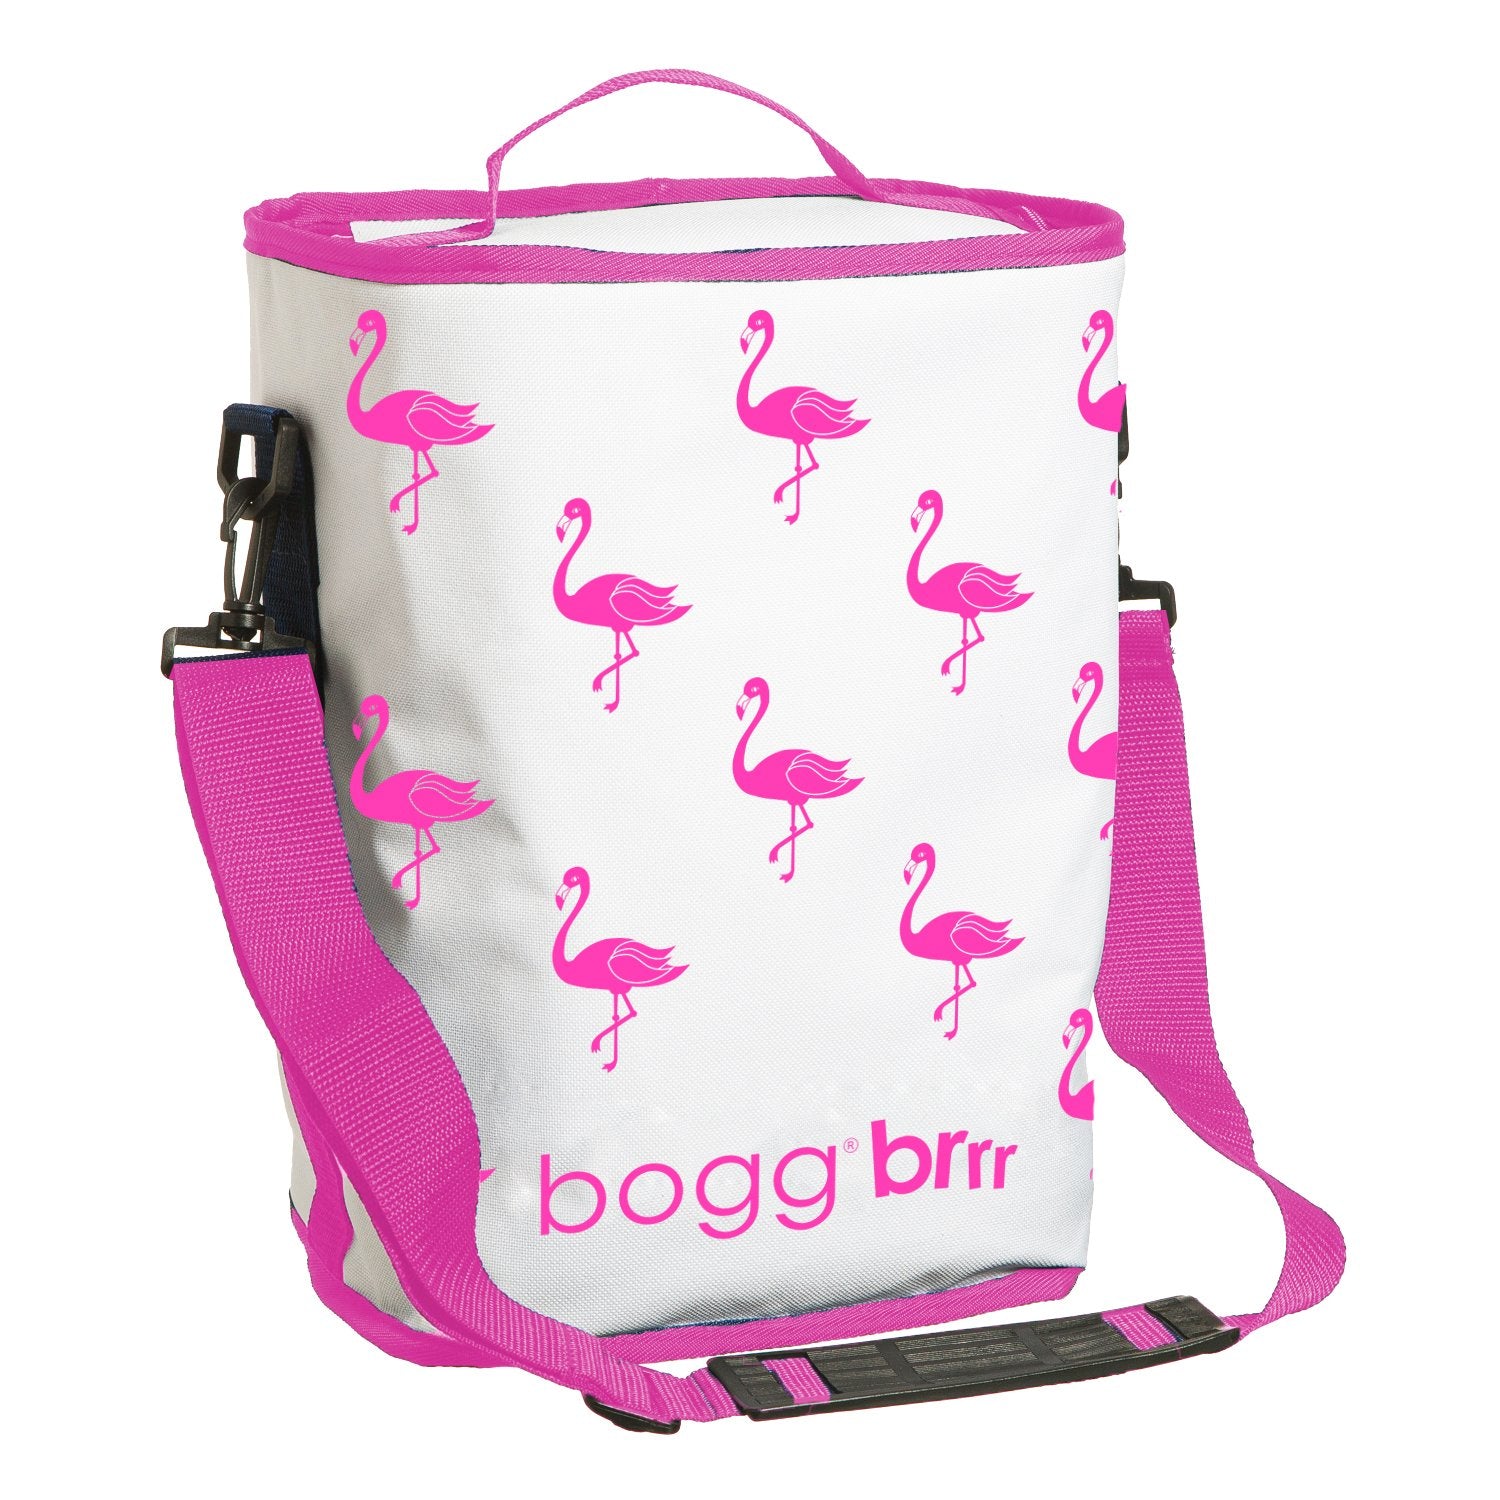 Bogg Bag - Did you know you can put your insert bags on